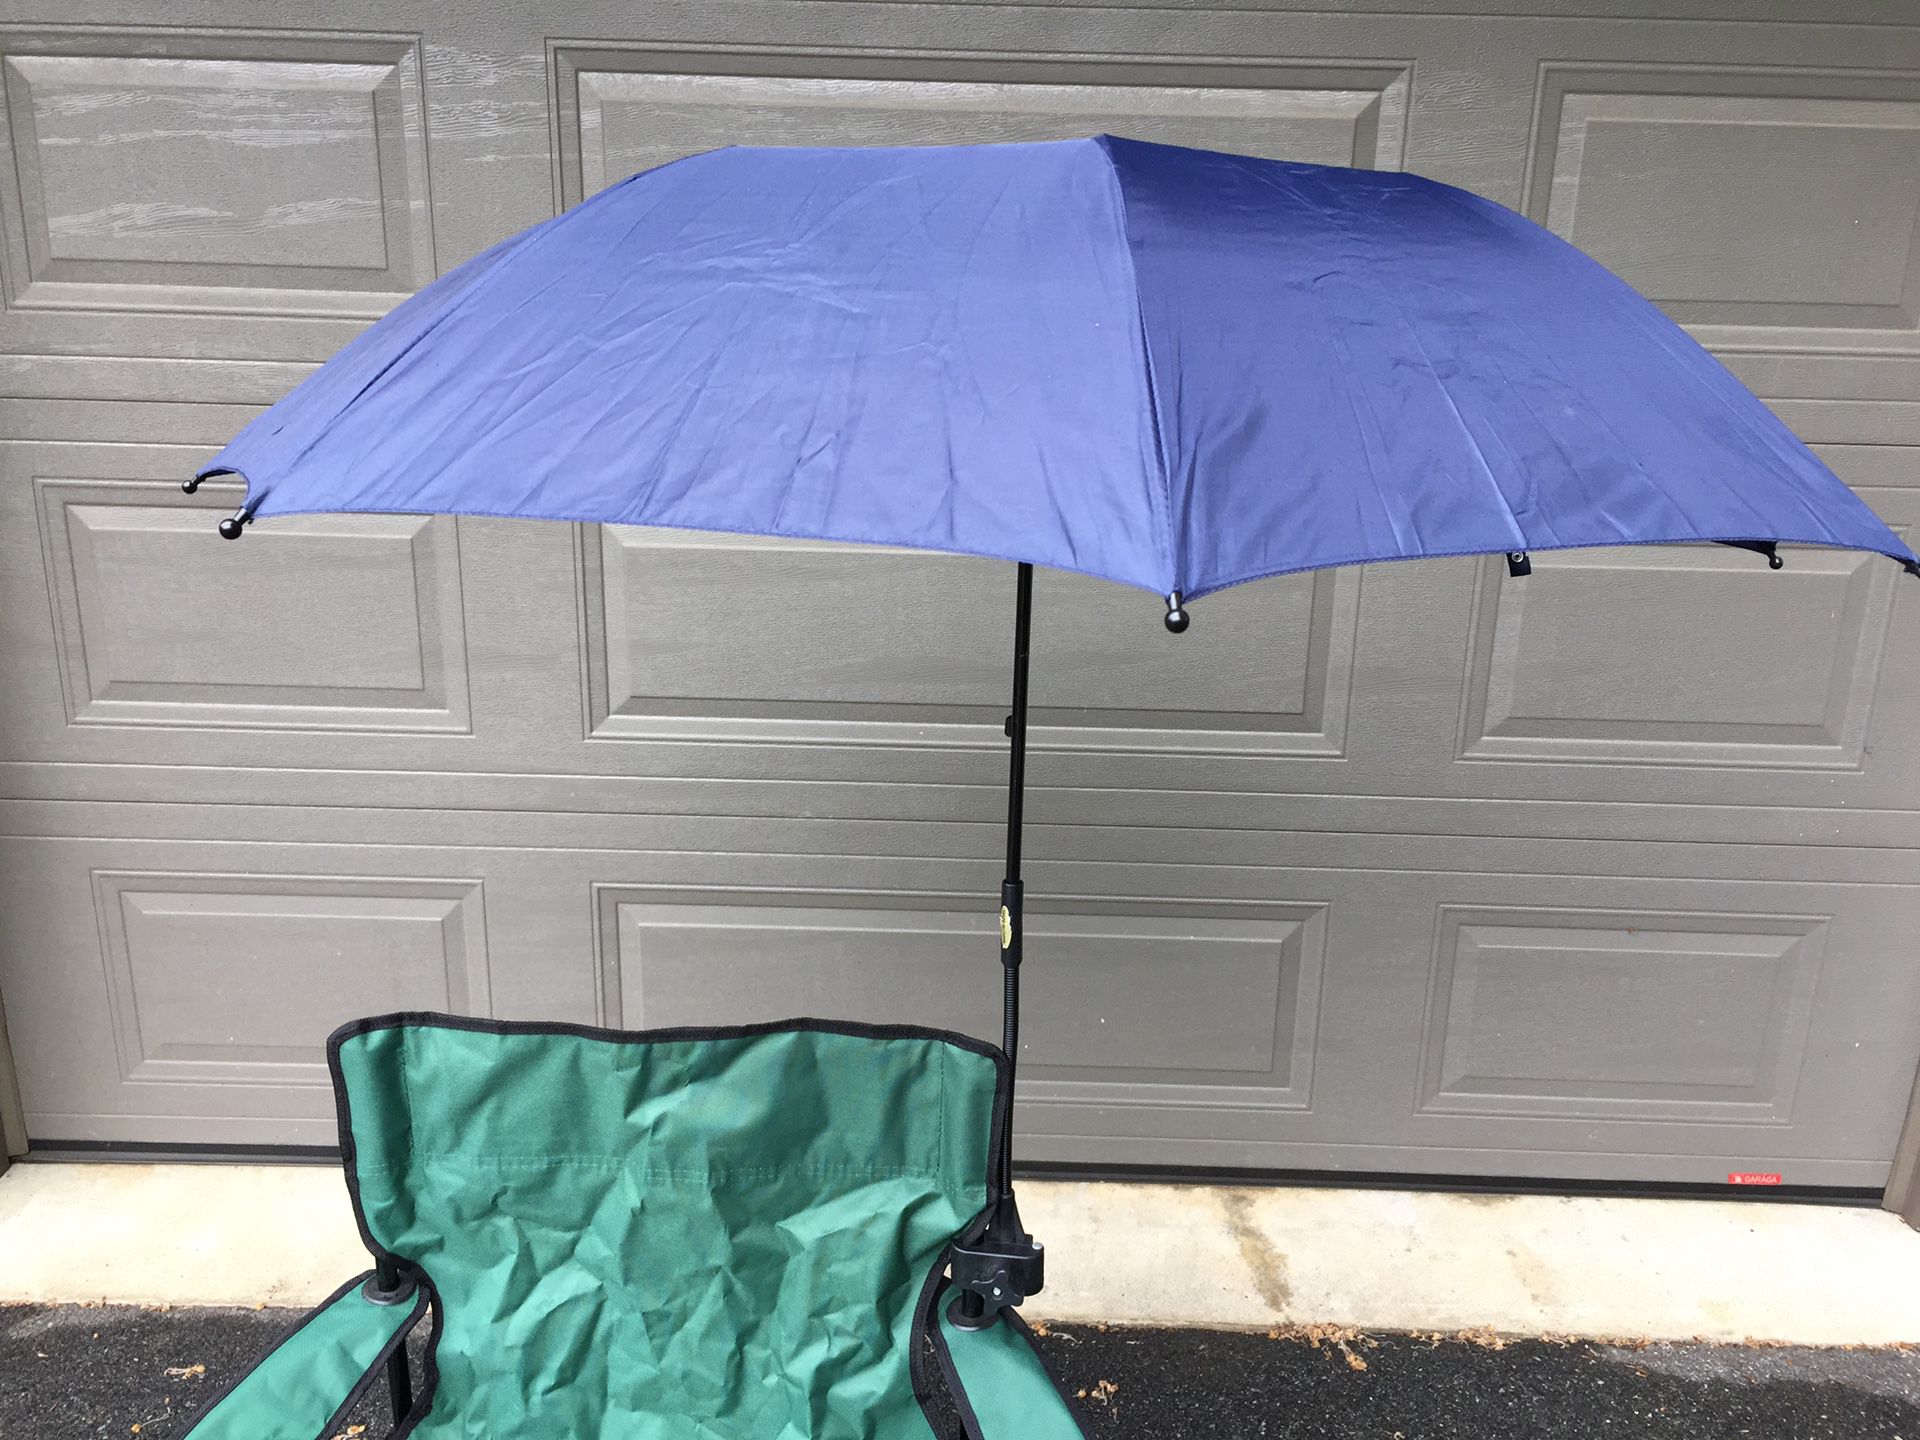 Clamp on umbrella for outdoor chair